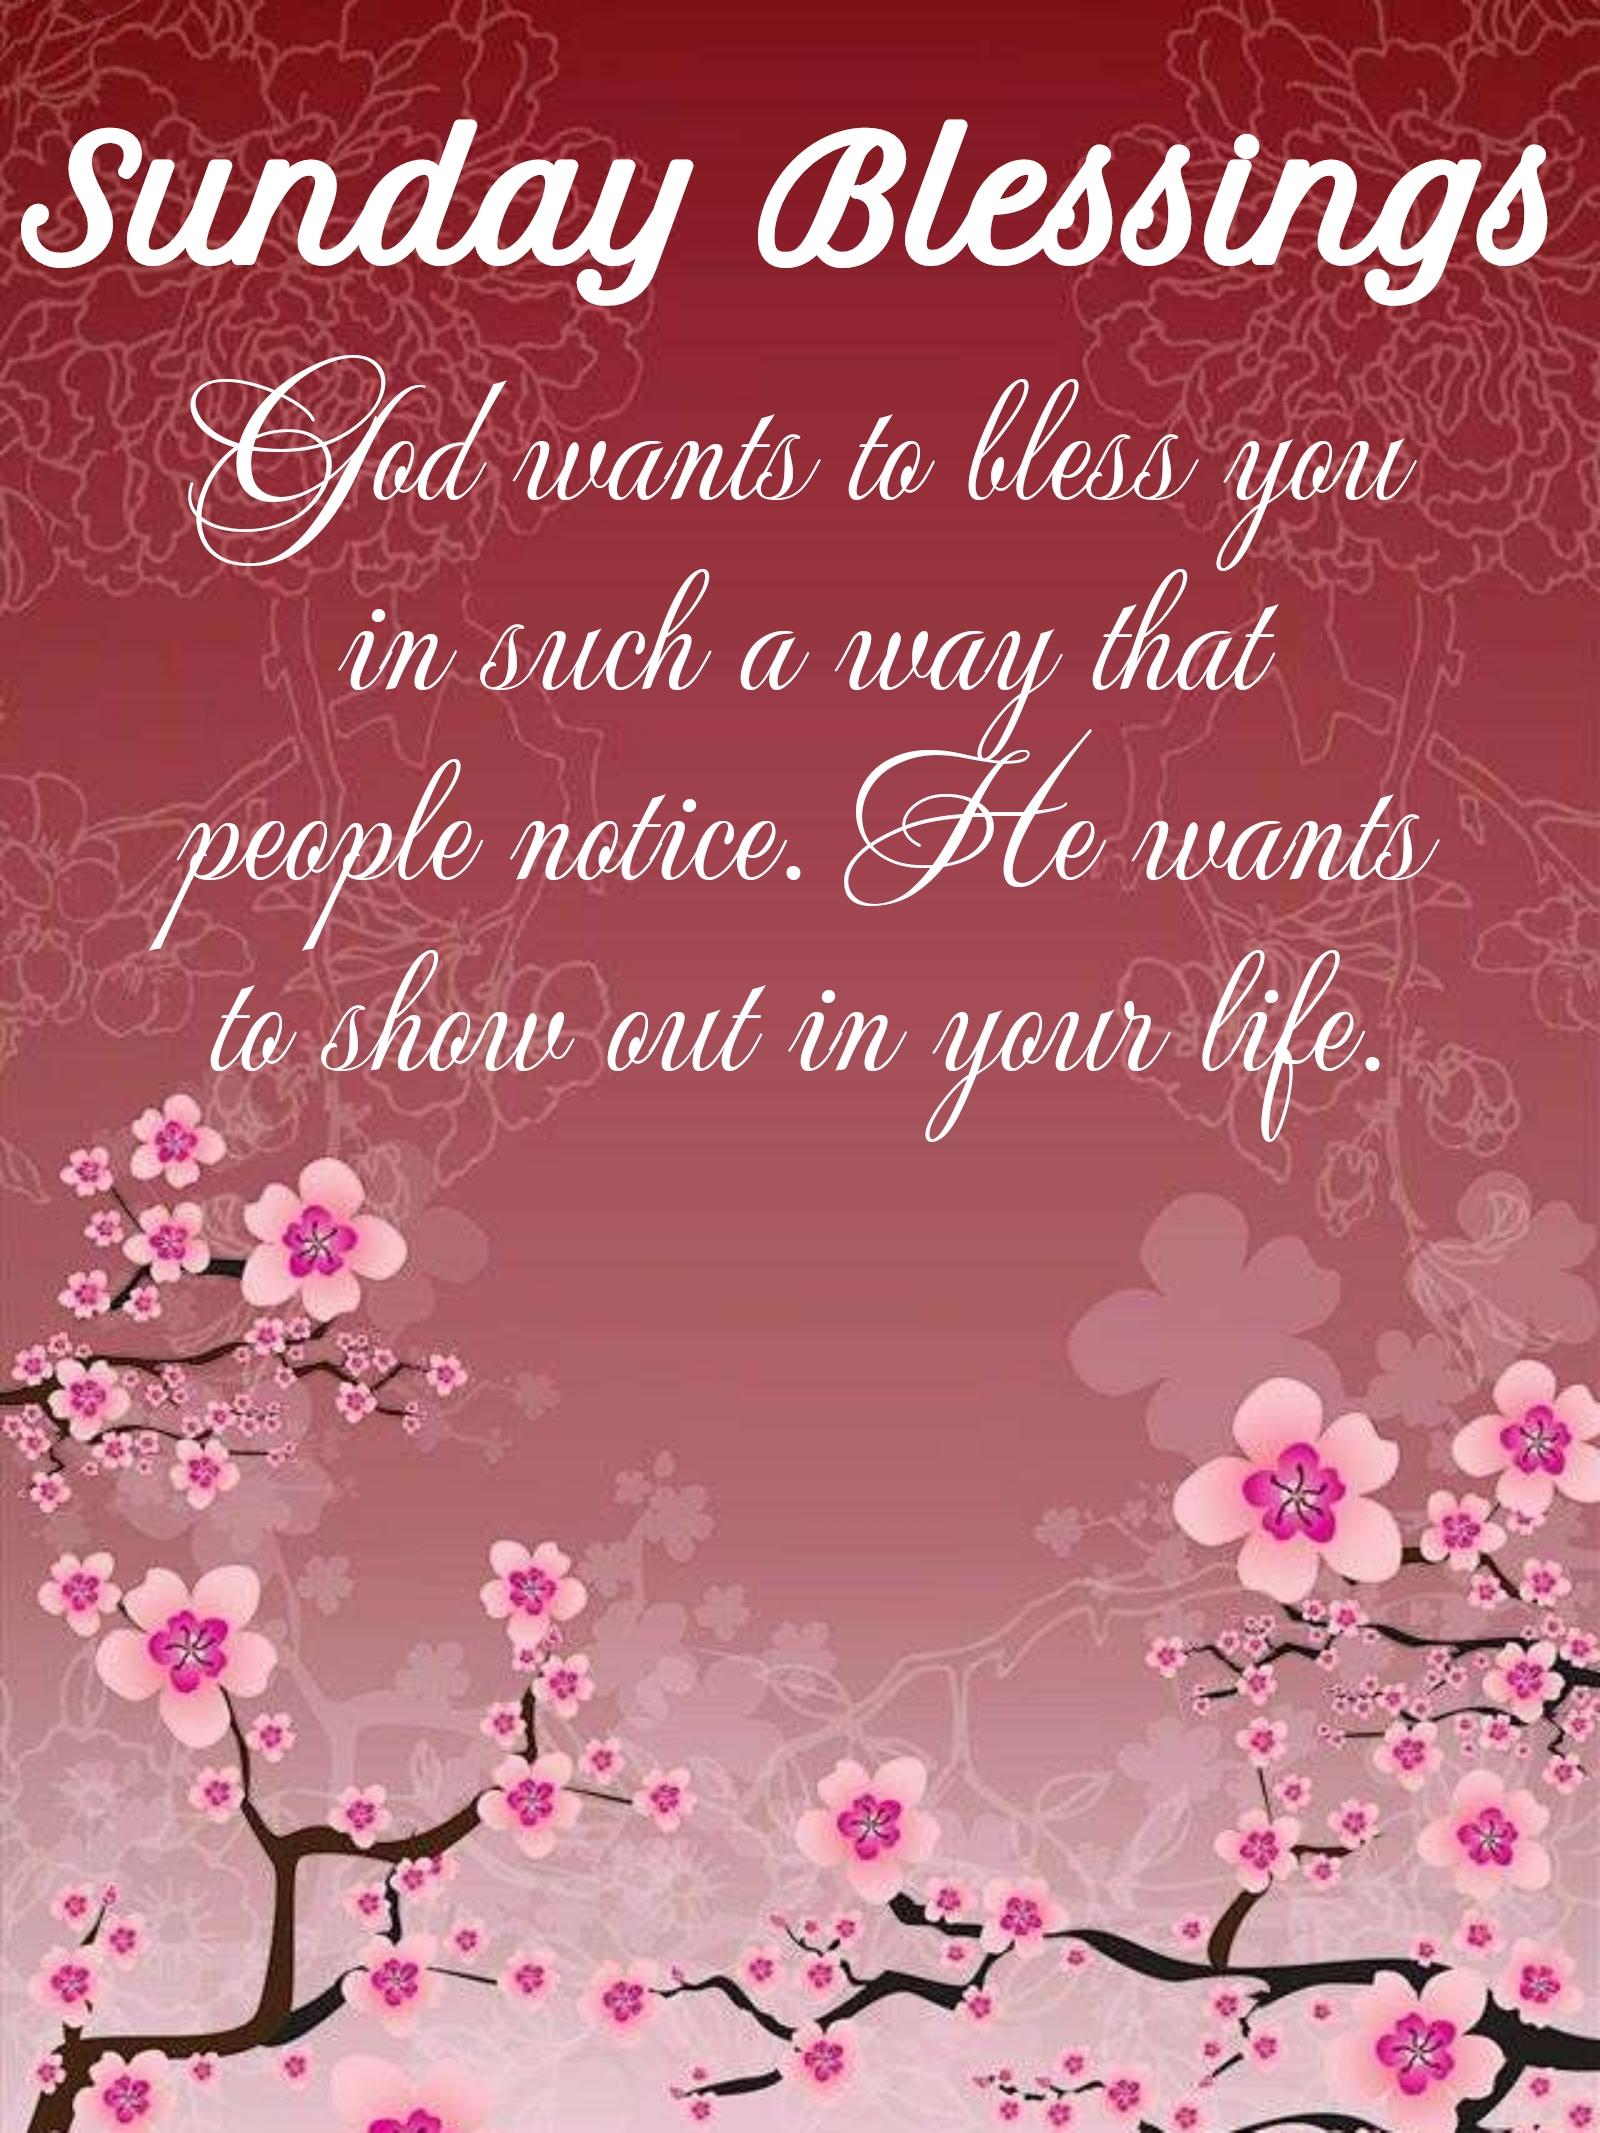 God wants to bless you in such a way that people notice He wants to show out in your life